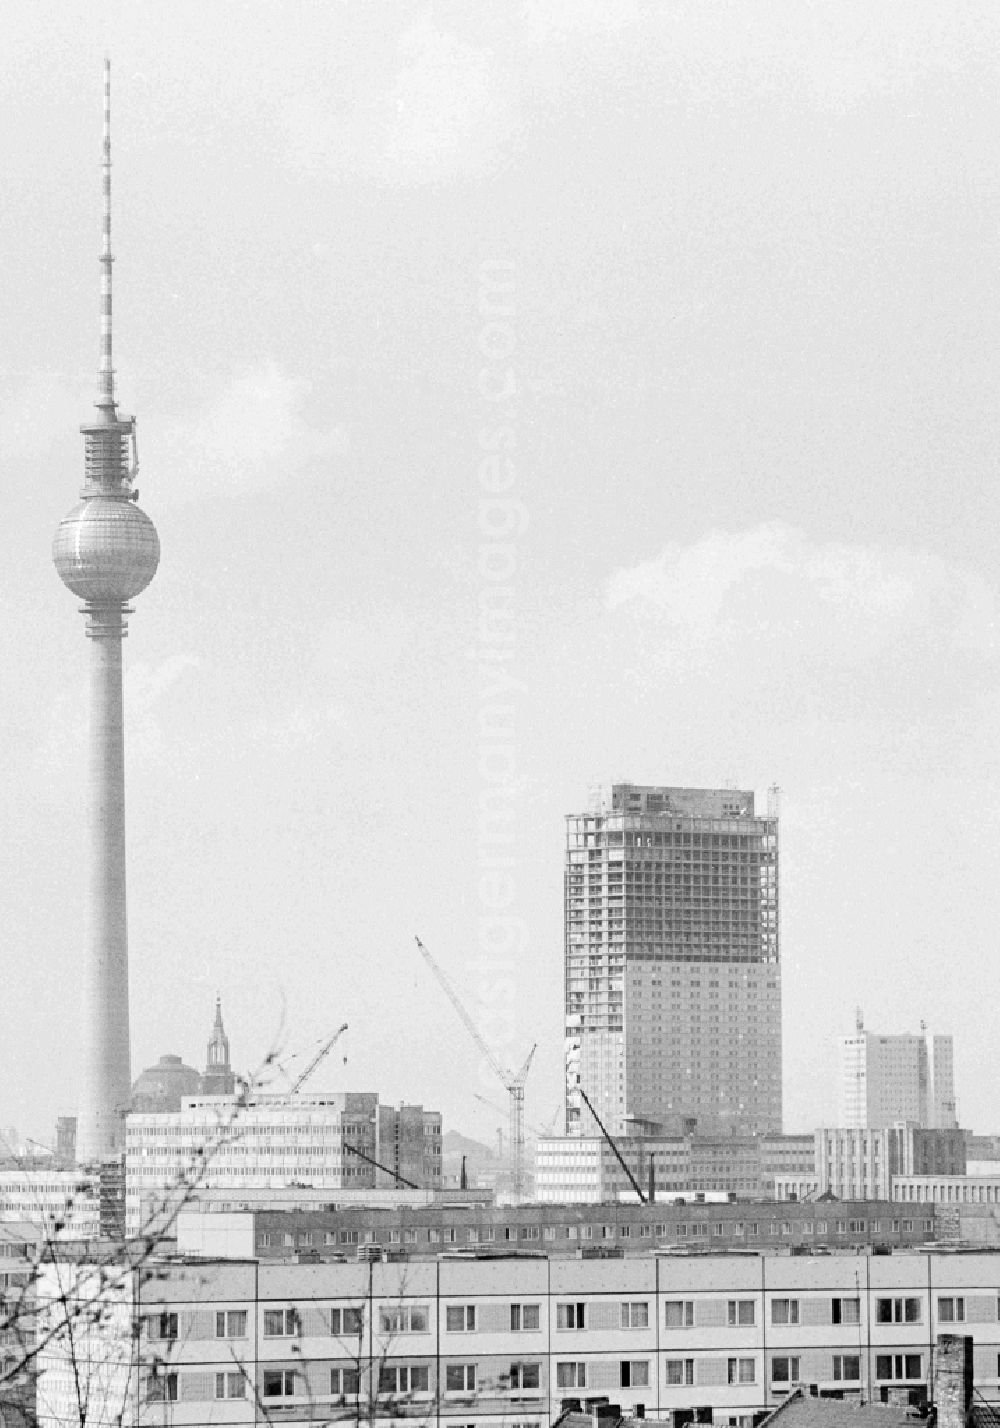 GDR image archive: Berlin - Establishment of the bed tower of Inter Hotel Stadt Berlin, today Park Inn Berlin Alexanderplatz in Berlin, the former capital of the GDR, German Democratic Republic. On the left of the Berlin TV Tower